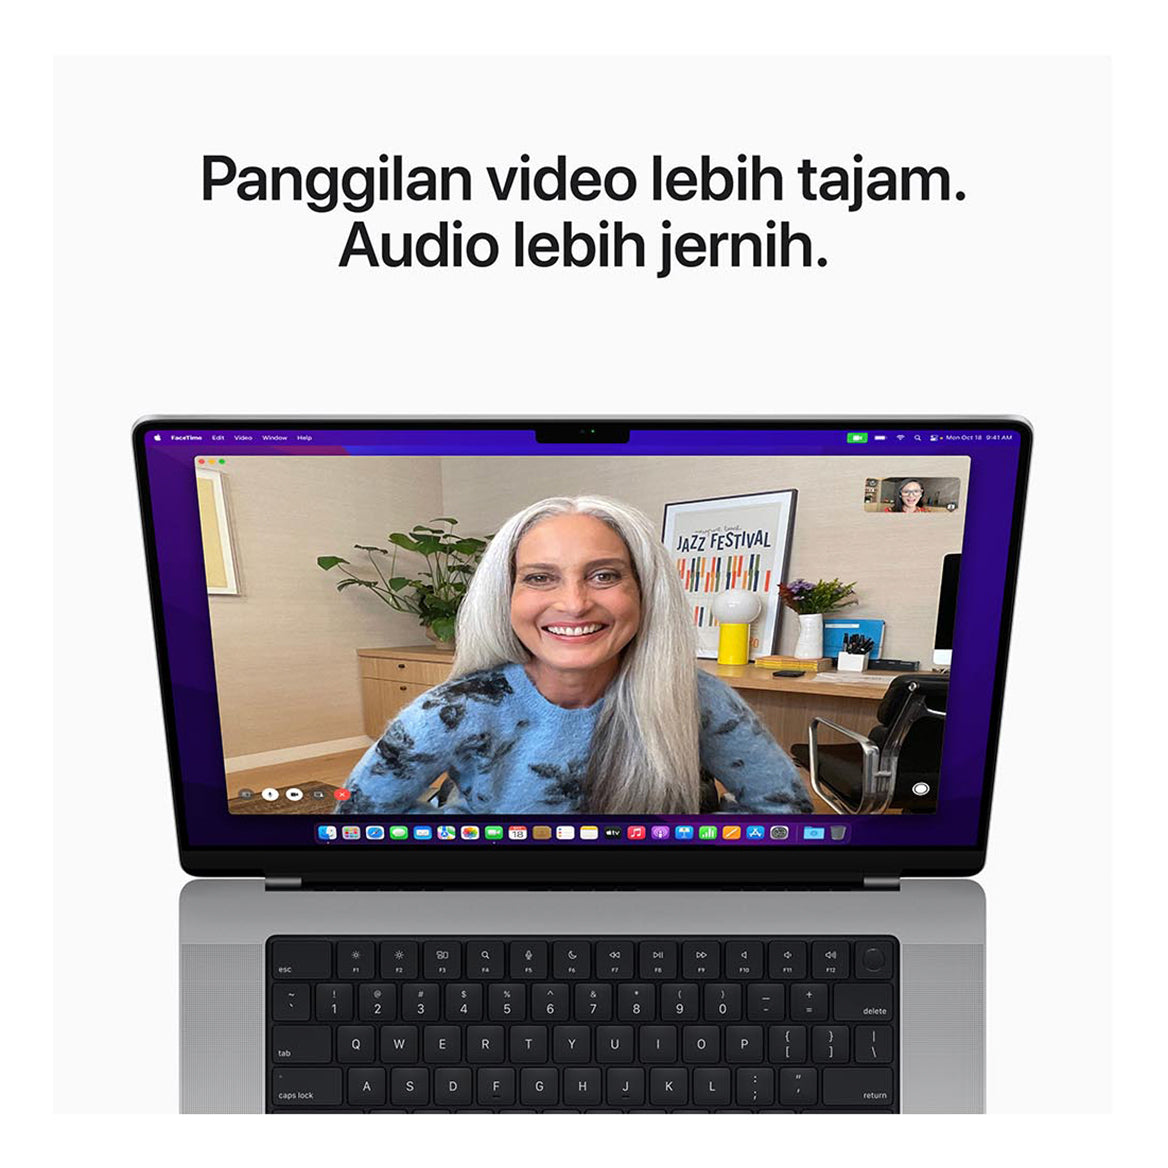 Products MacBook Pro M1 video call 1